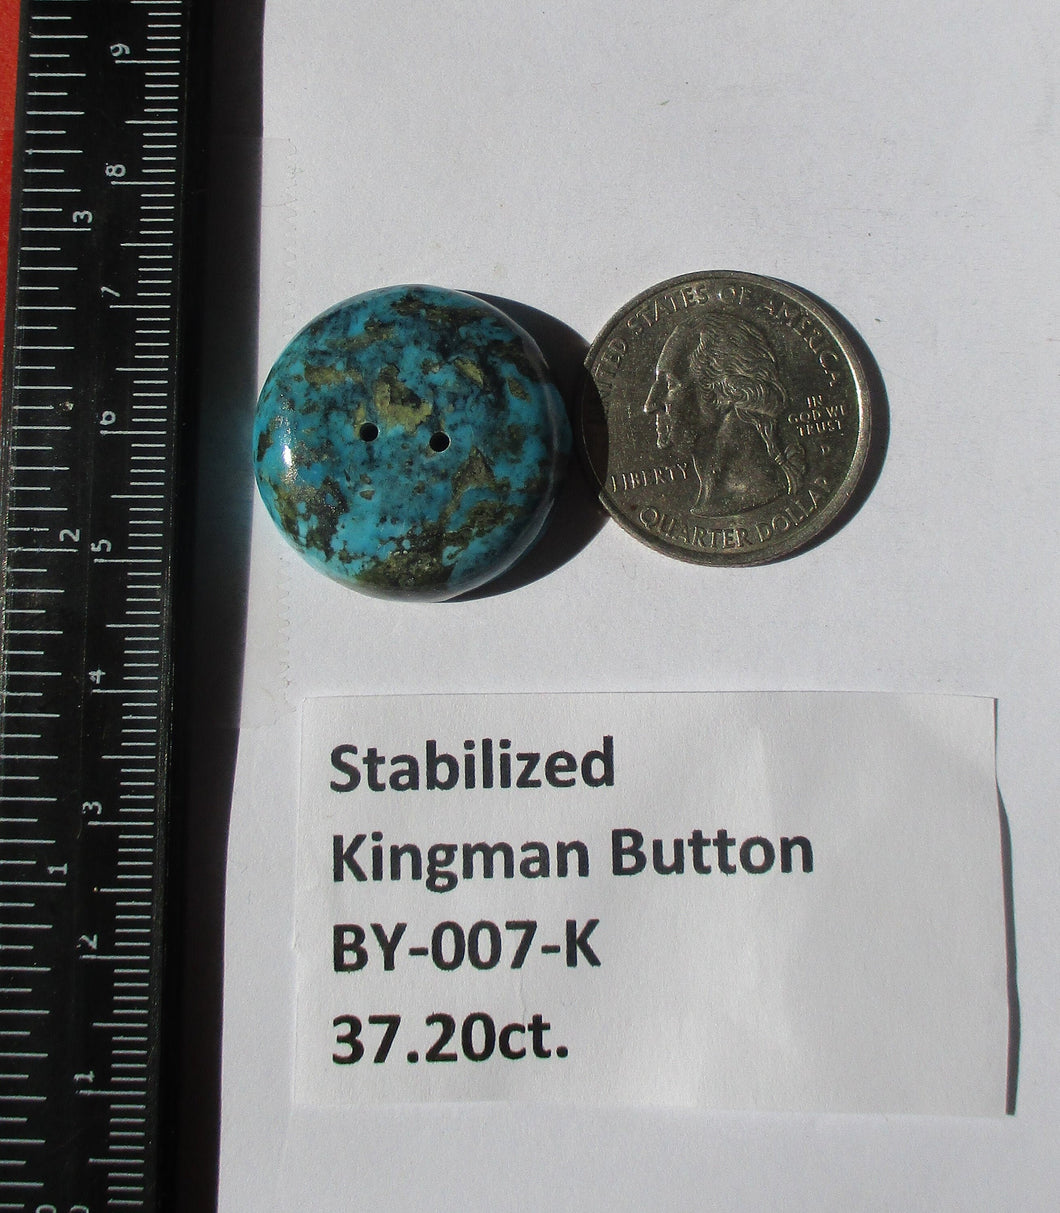 37.2 ct. (25.5 round x 7 mm) Stabilized Kingman Turquoise Button  Cabochon Gemstone, BY 007